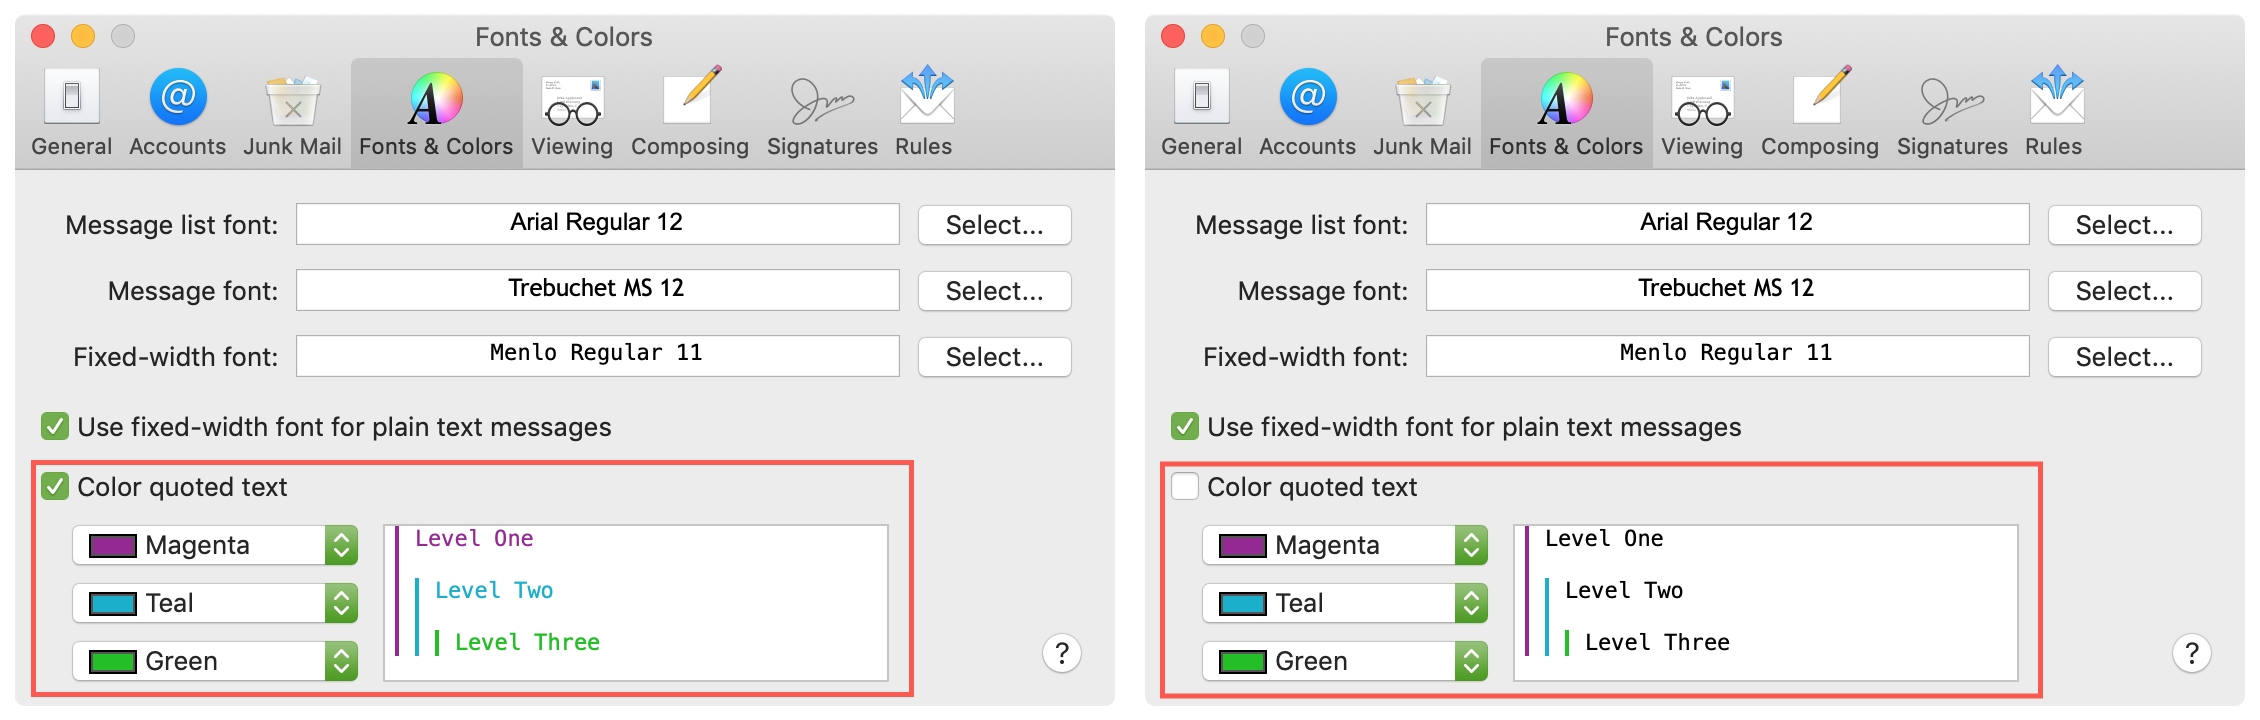 How To Customize Fonts And Colors In The Mail App On Mac